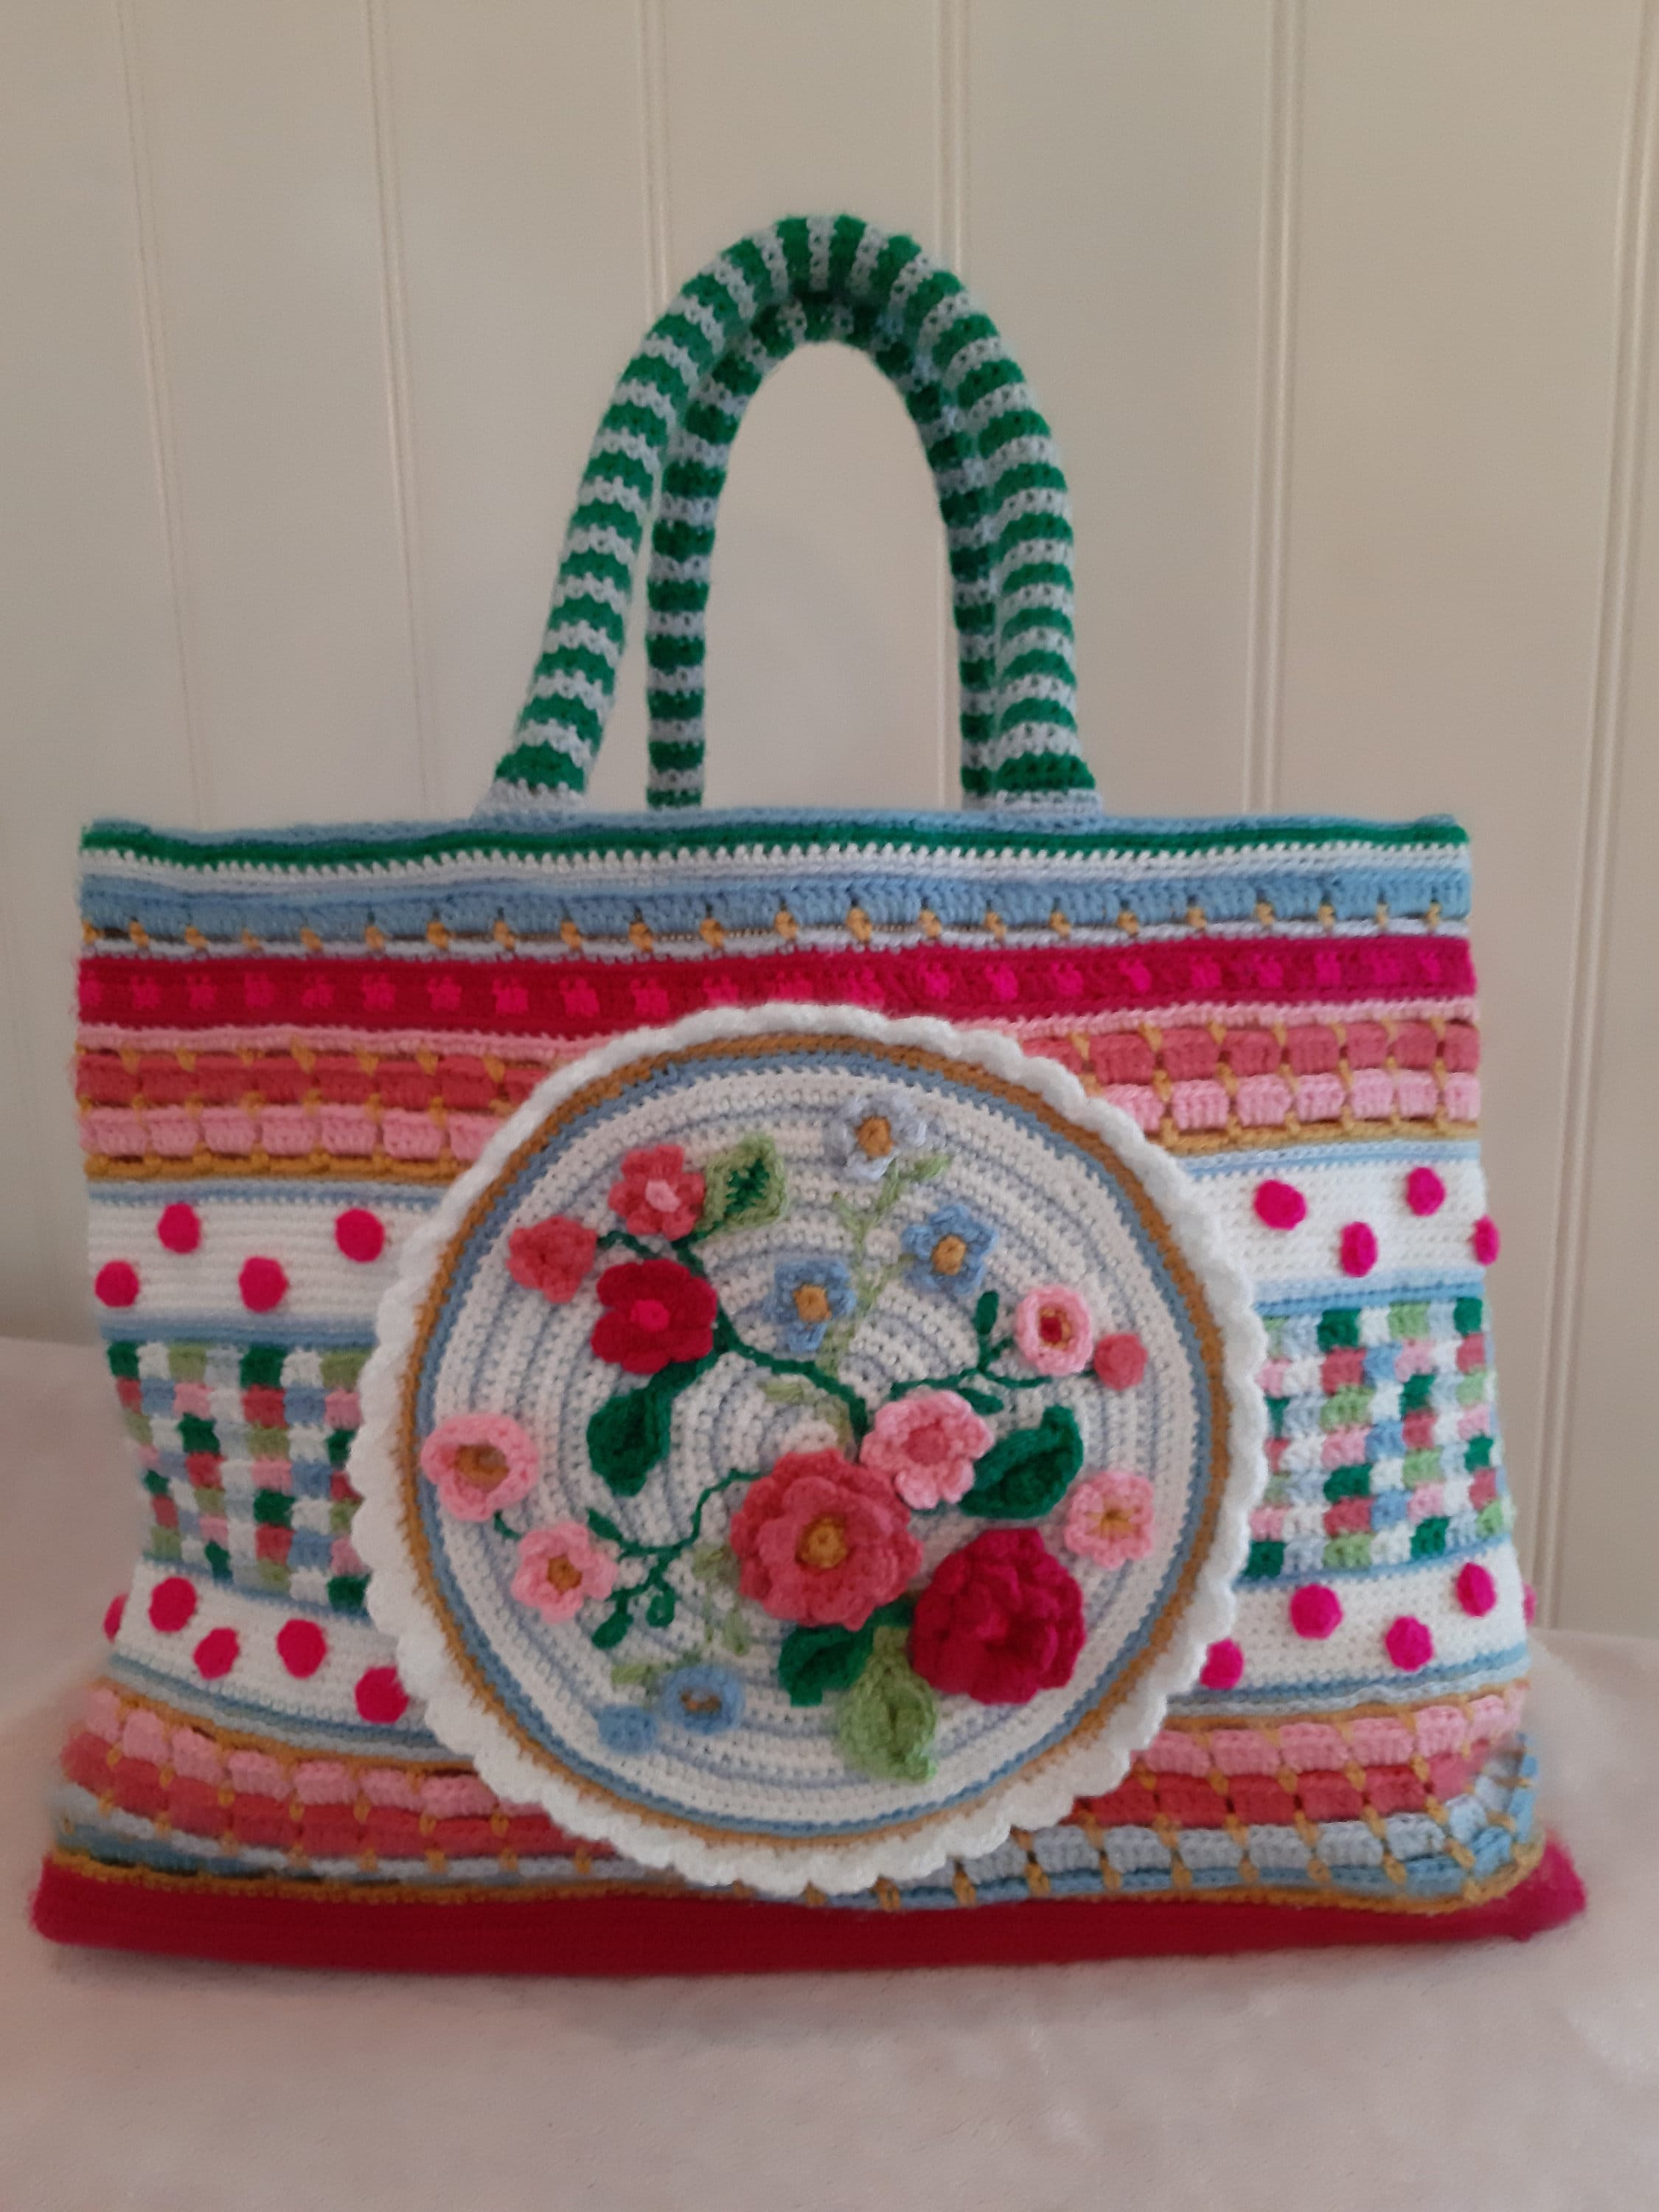 Pattern for Cheerful Crochet Flower Bag With Dots and Flowers - Etsy